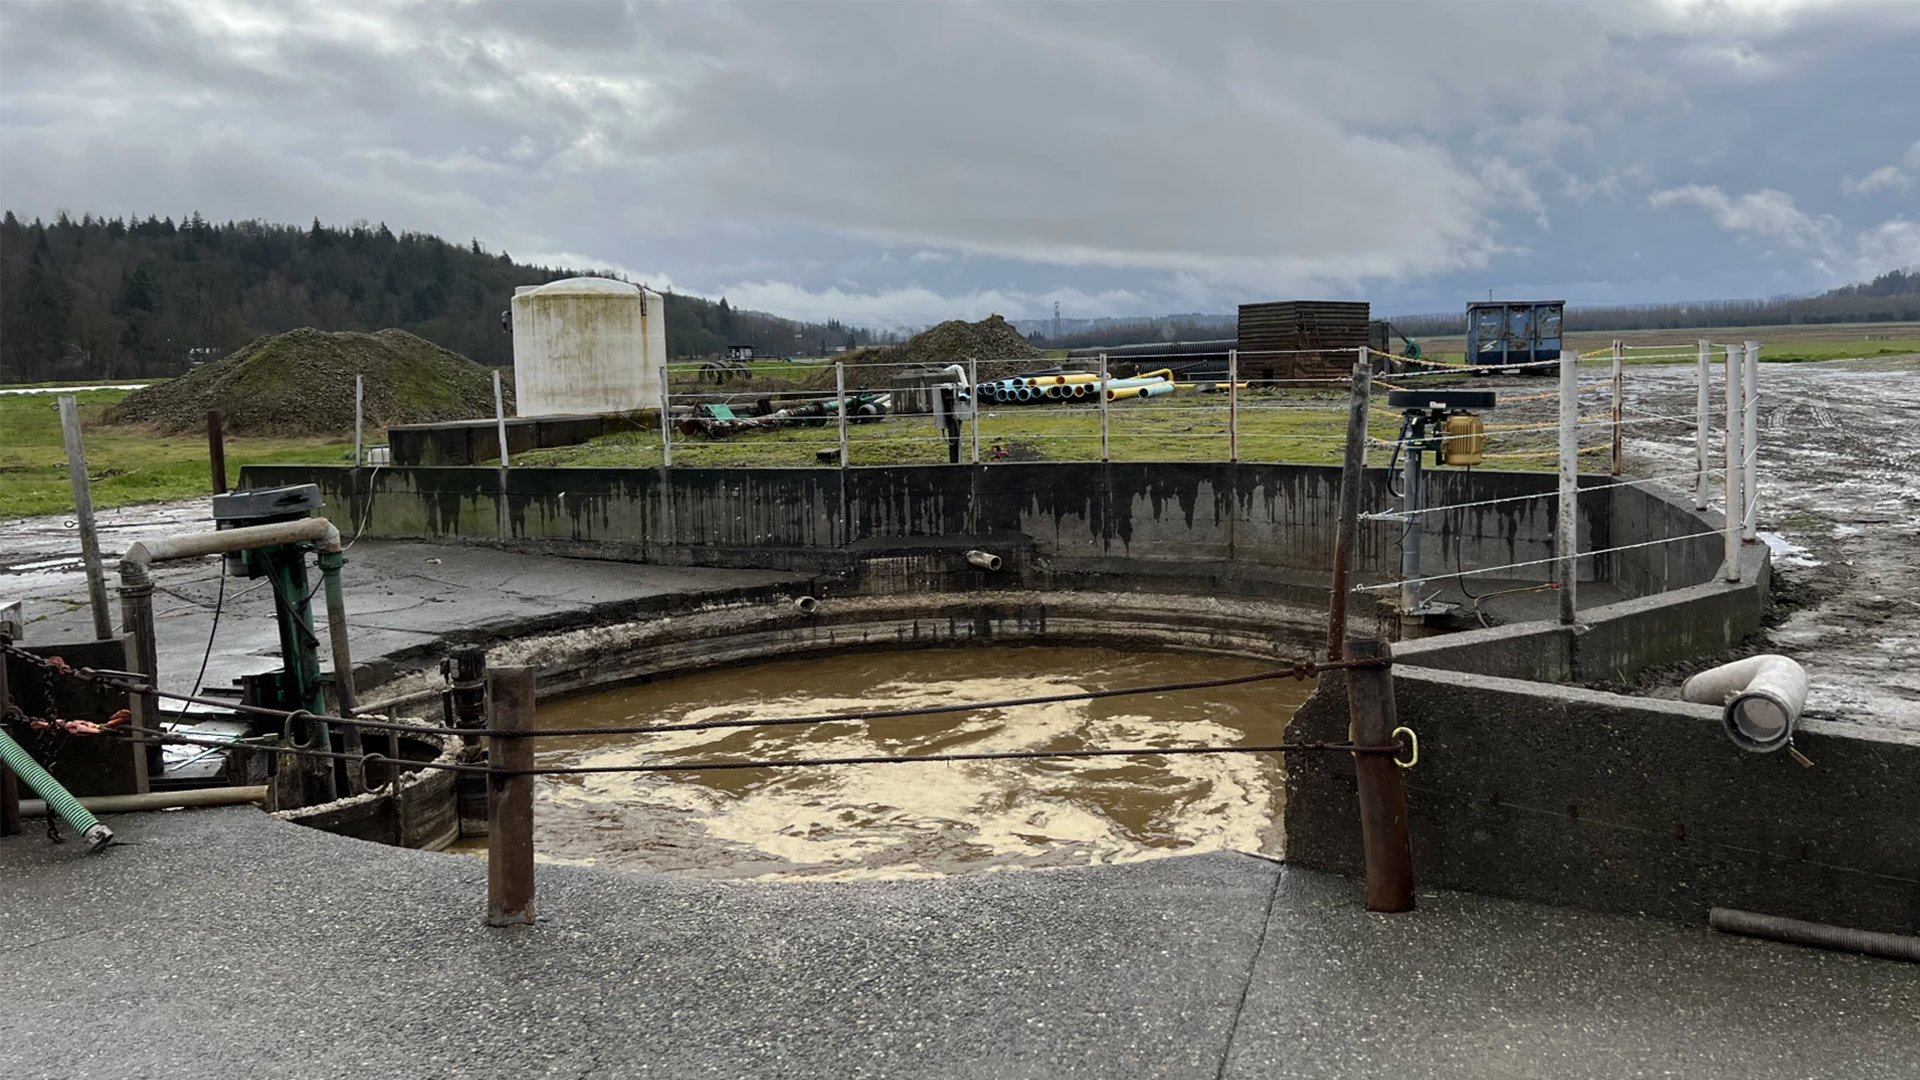 About 85,000 gallons a day of cow manure and food waste flow into the pit at Werkhoeven Dairy in Monroe, Washington. The digester captures methane that powers a generator, producing enough renewable energy for nearly 700 homes.